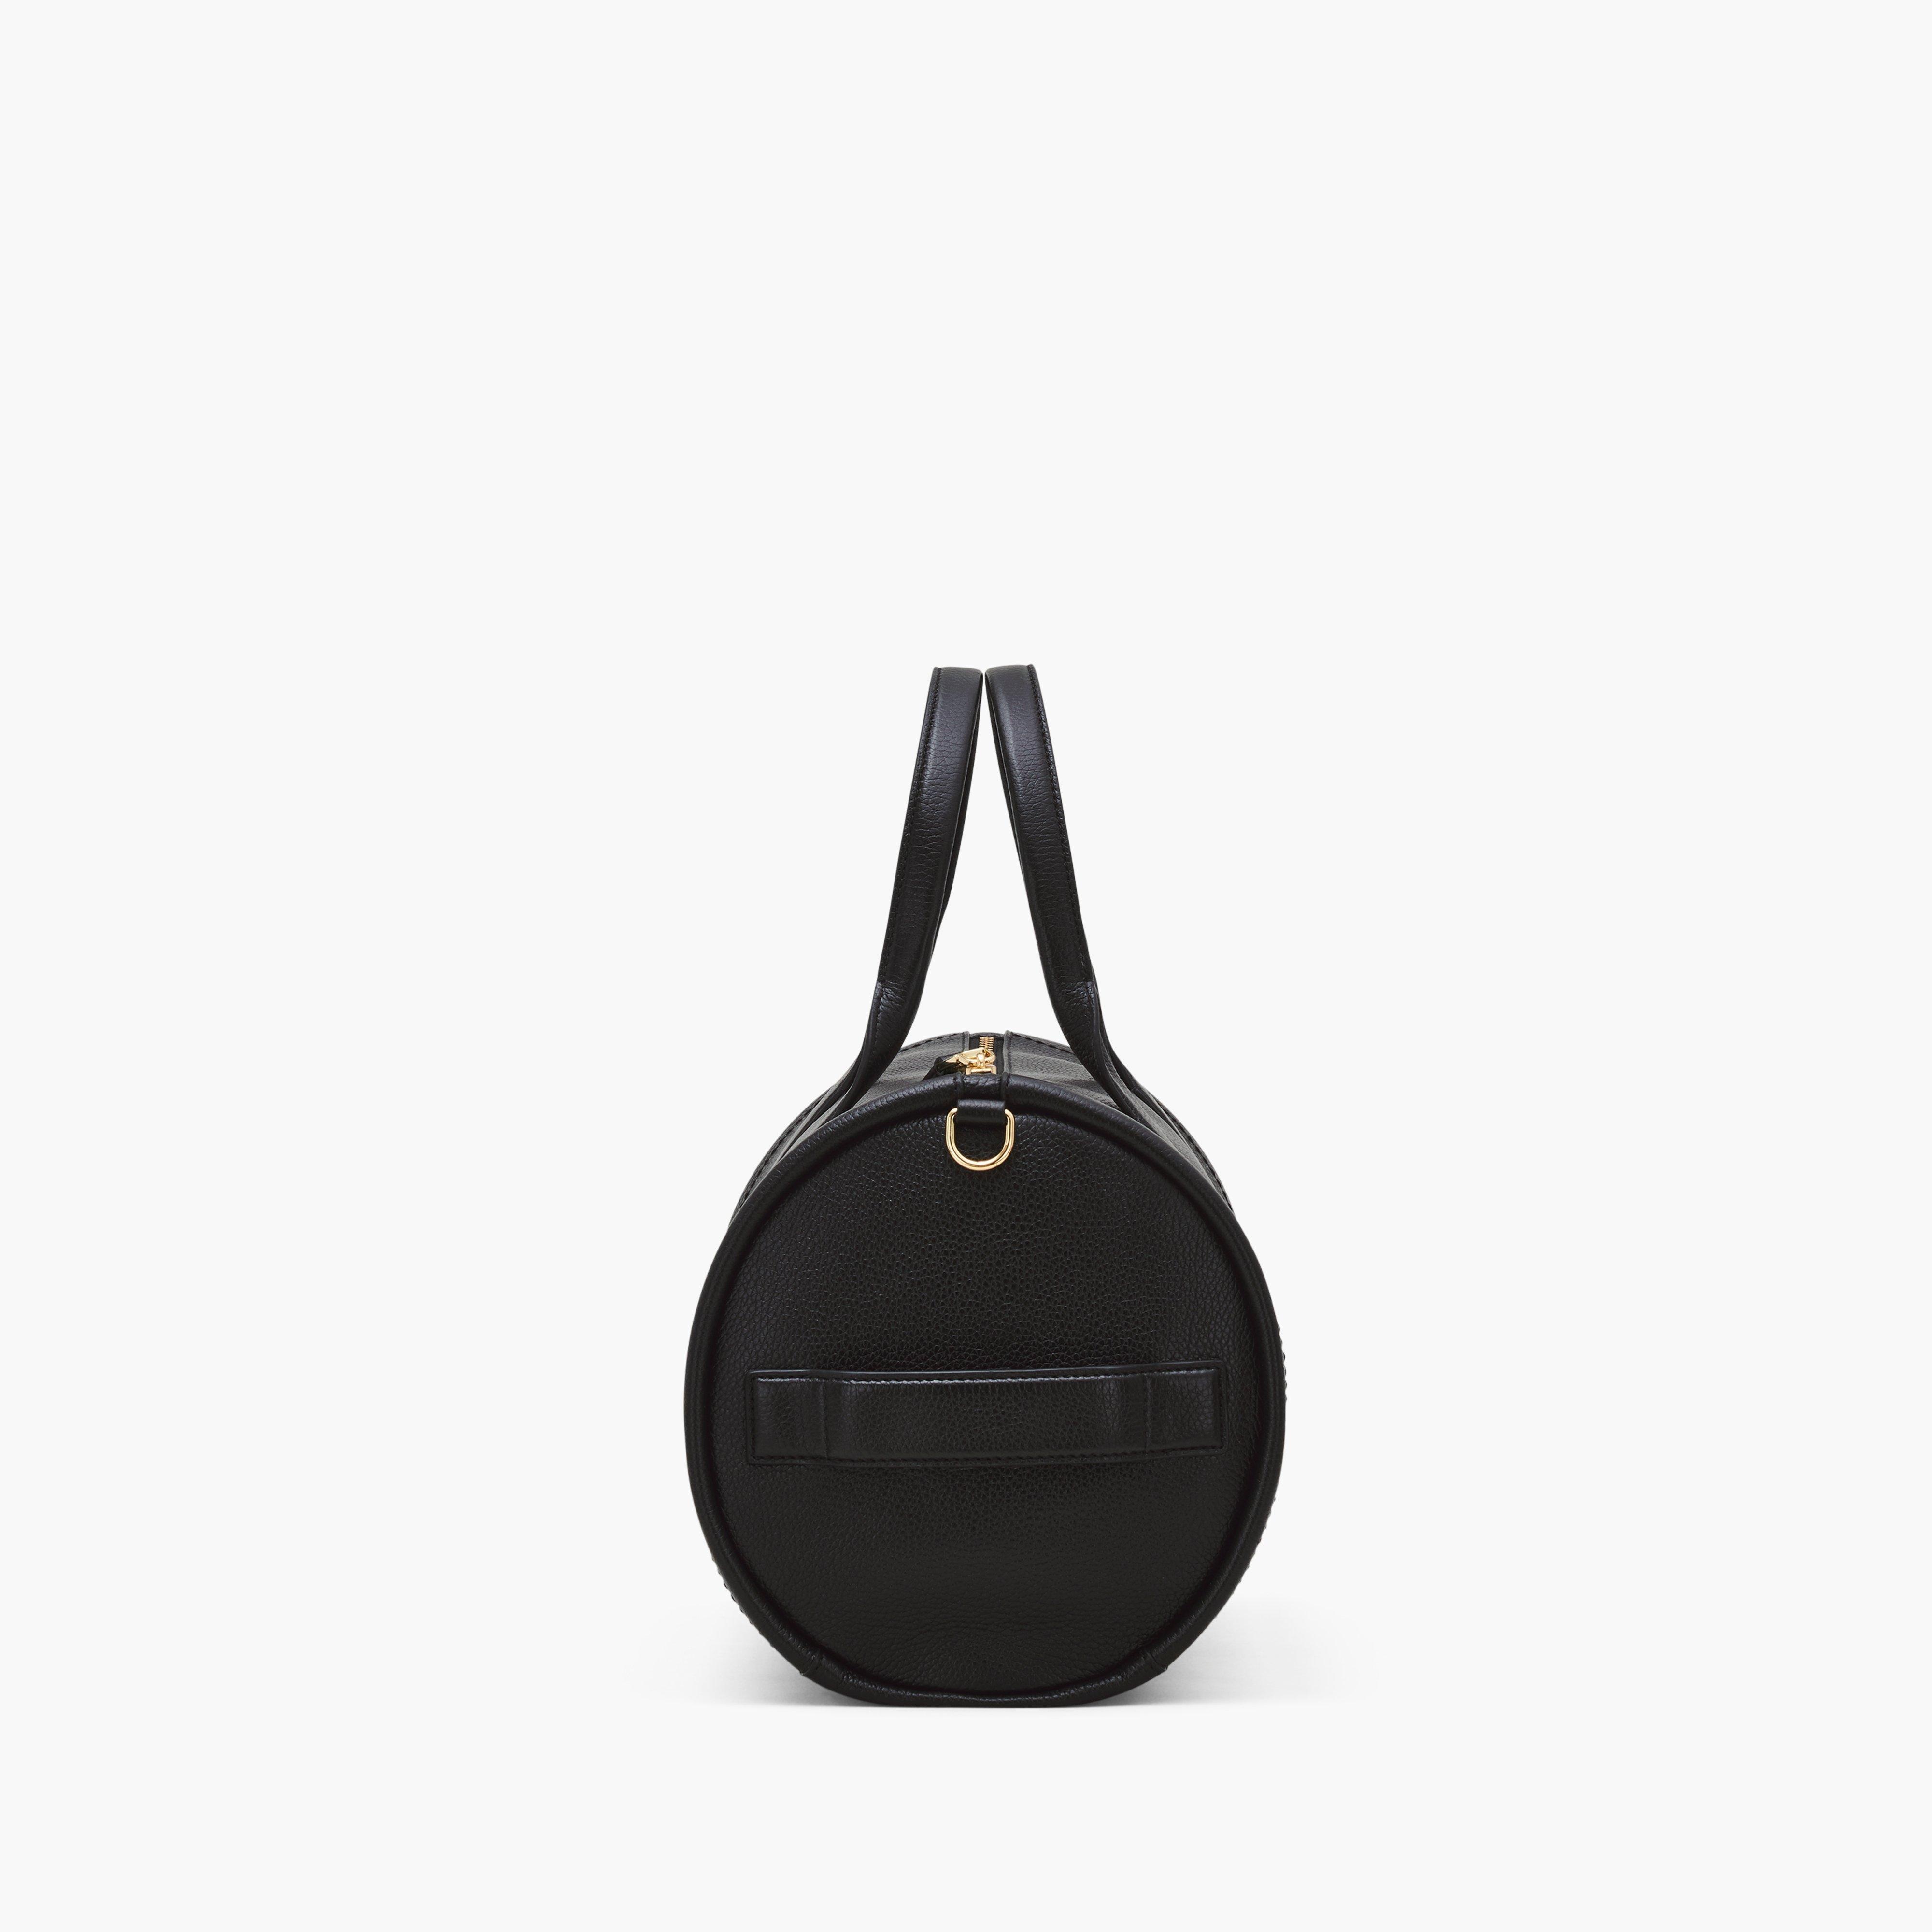 THE LEATHER LARGE DUFFLE BAG - 3